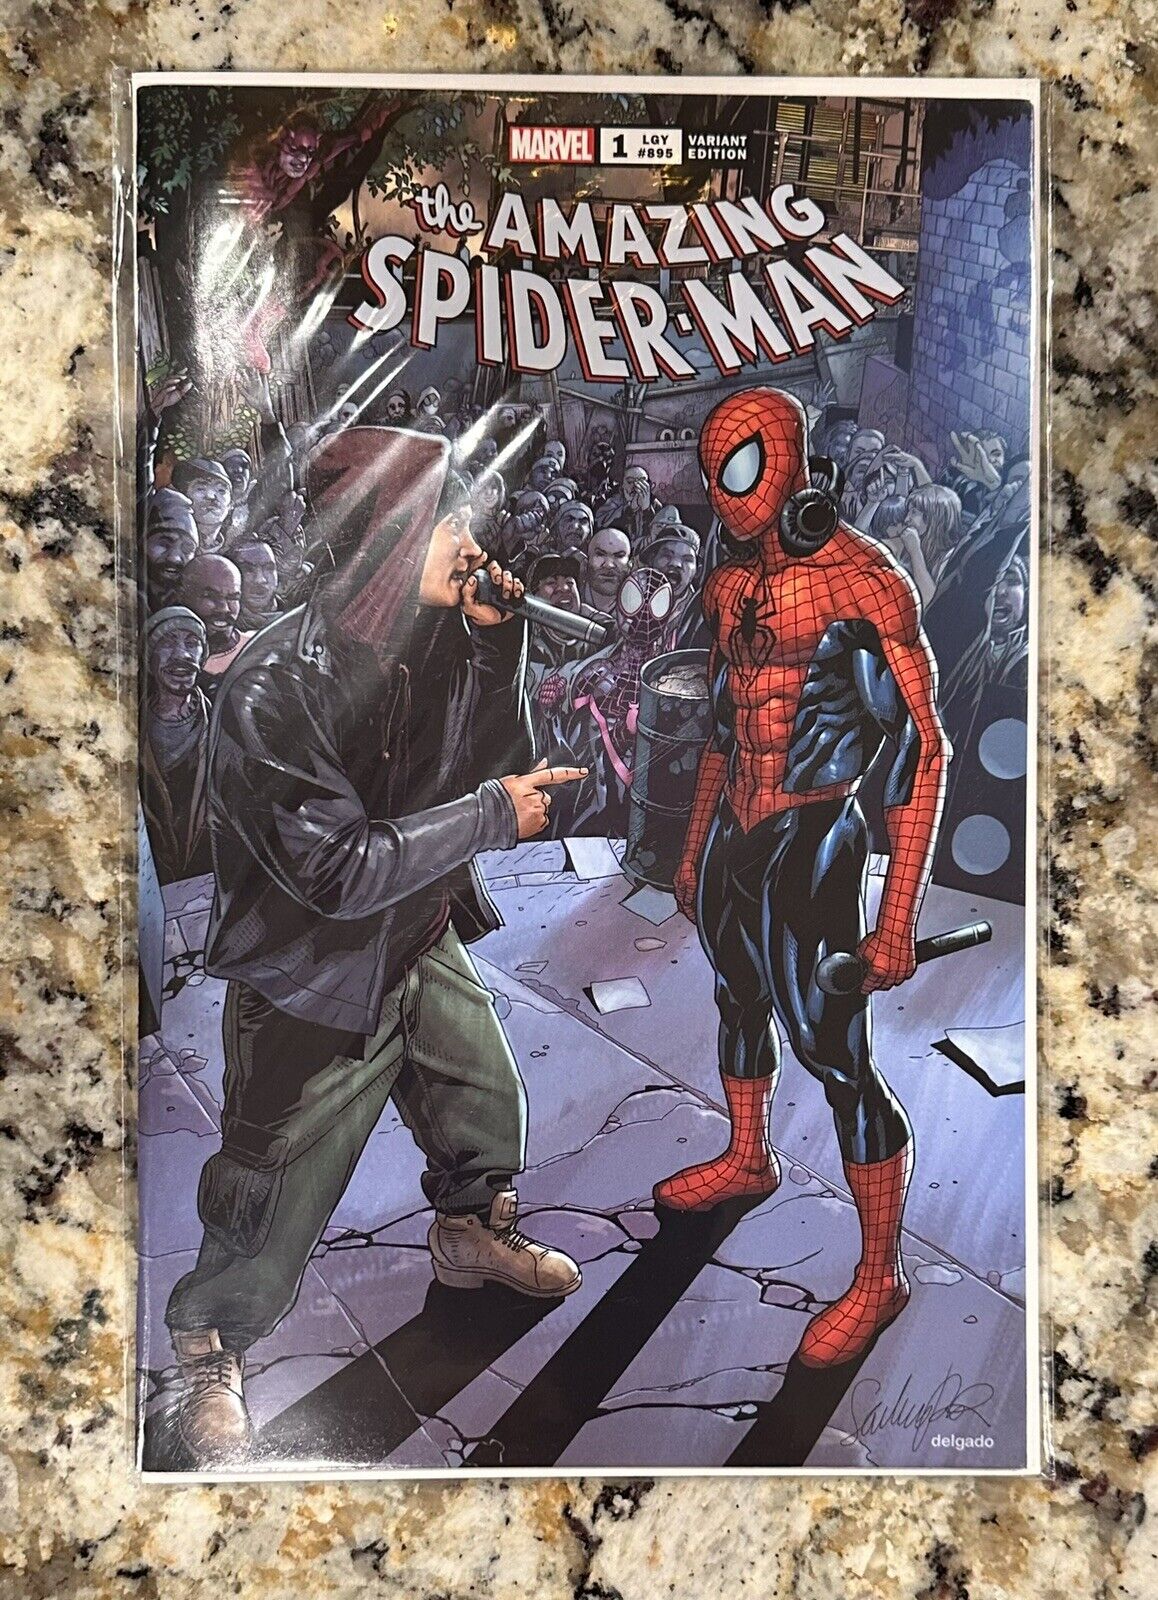 EMINEM X SPIDERMAN The Amazing Spider-Man #1 Variant In Hand 8-mile Cover